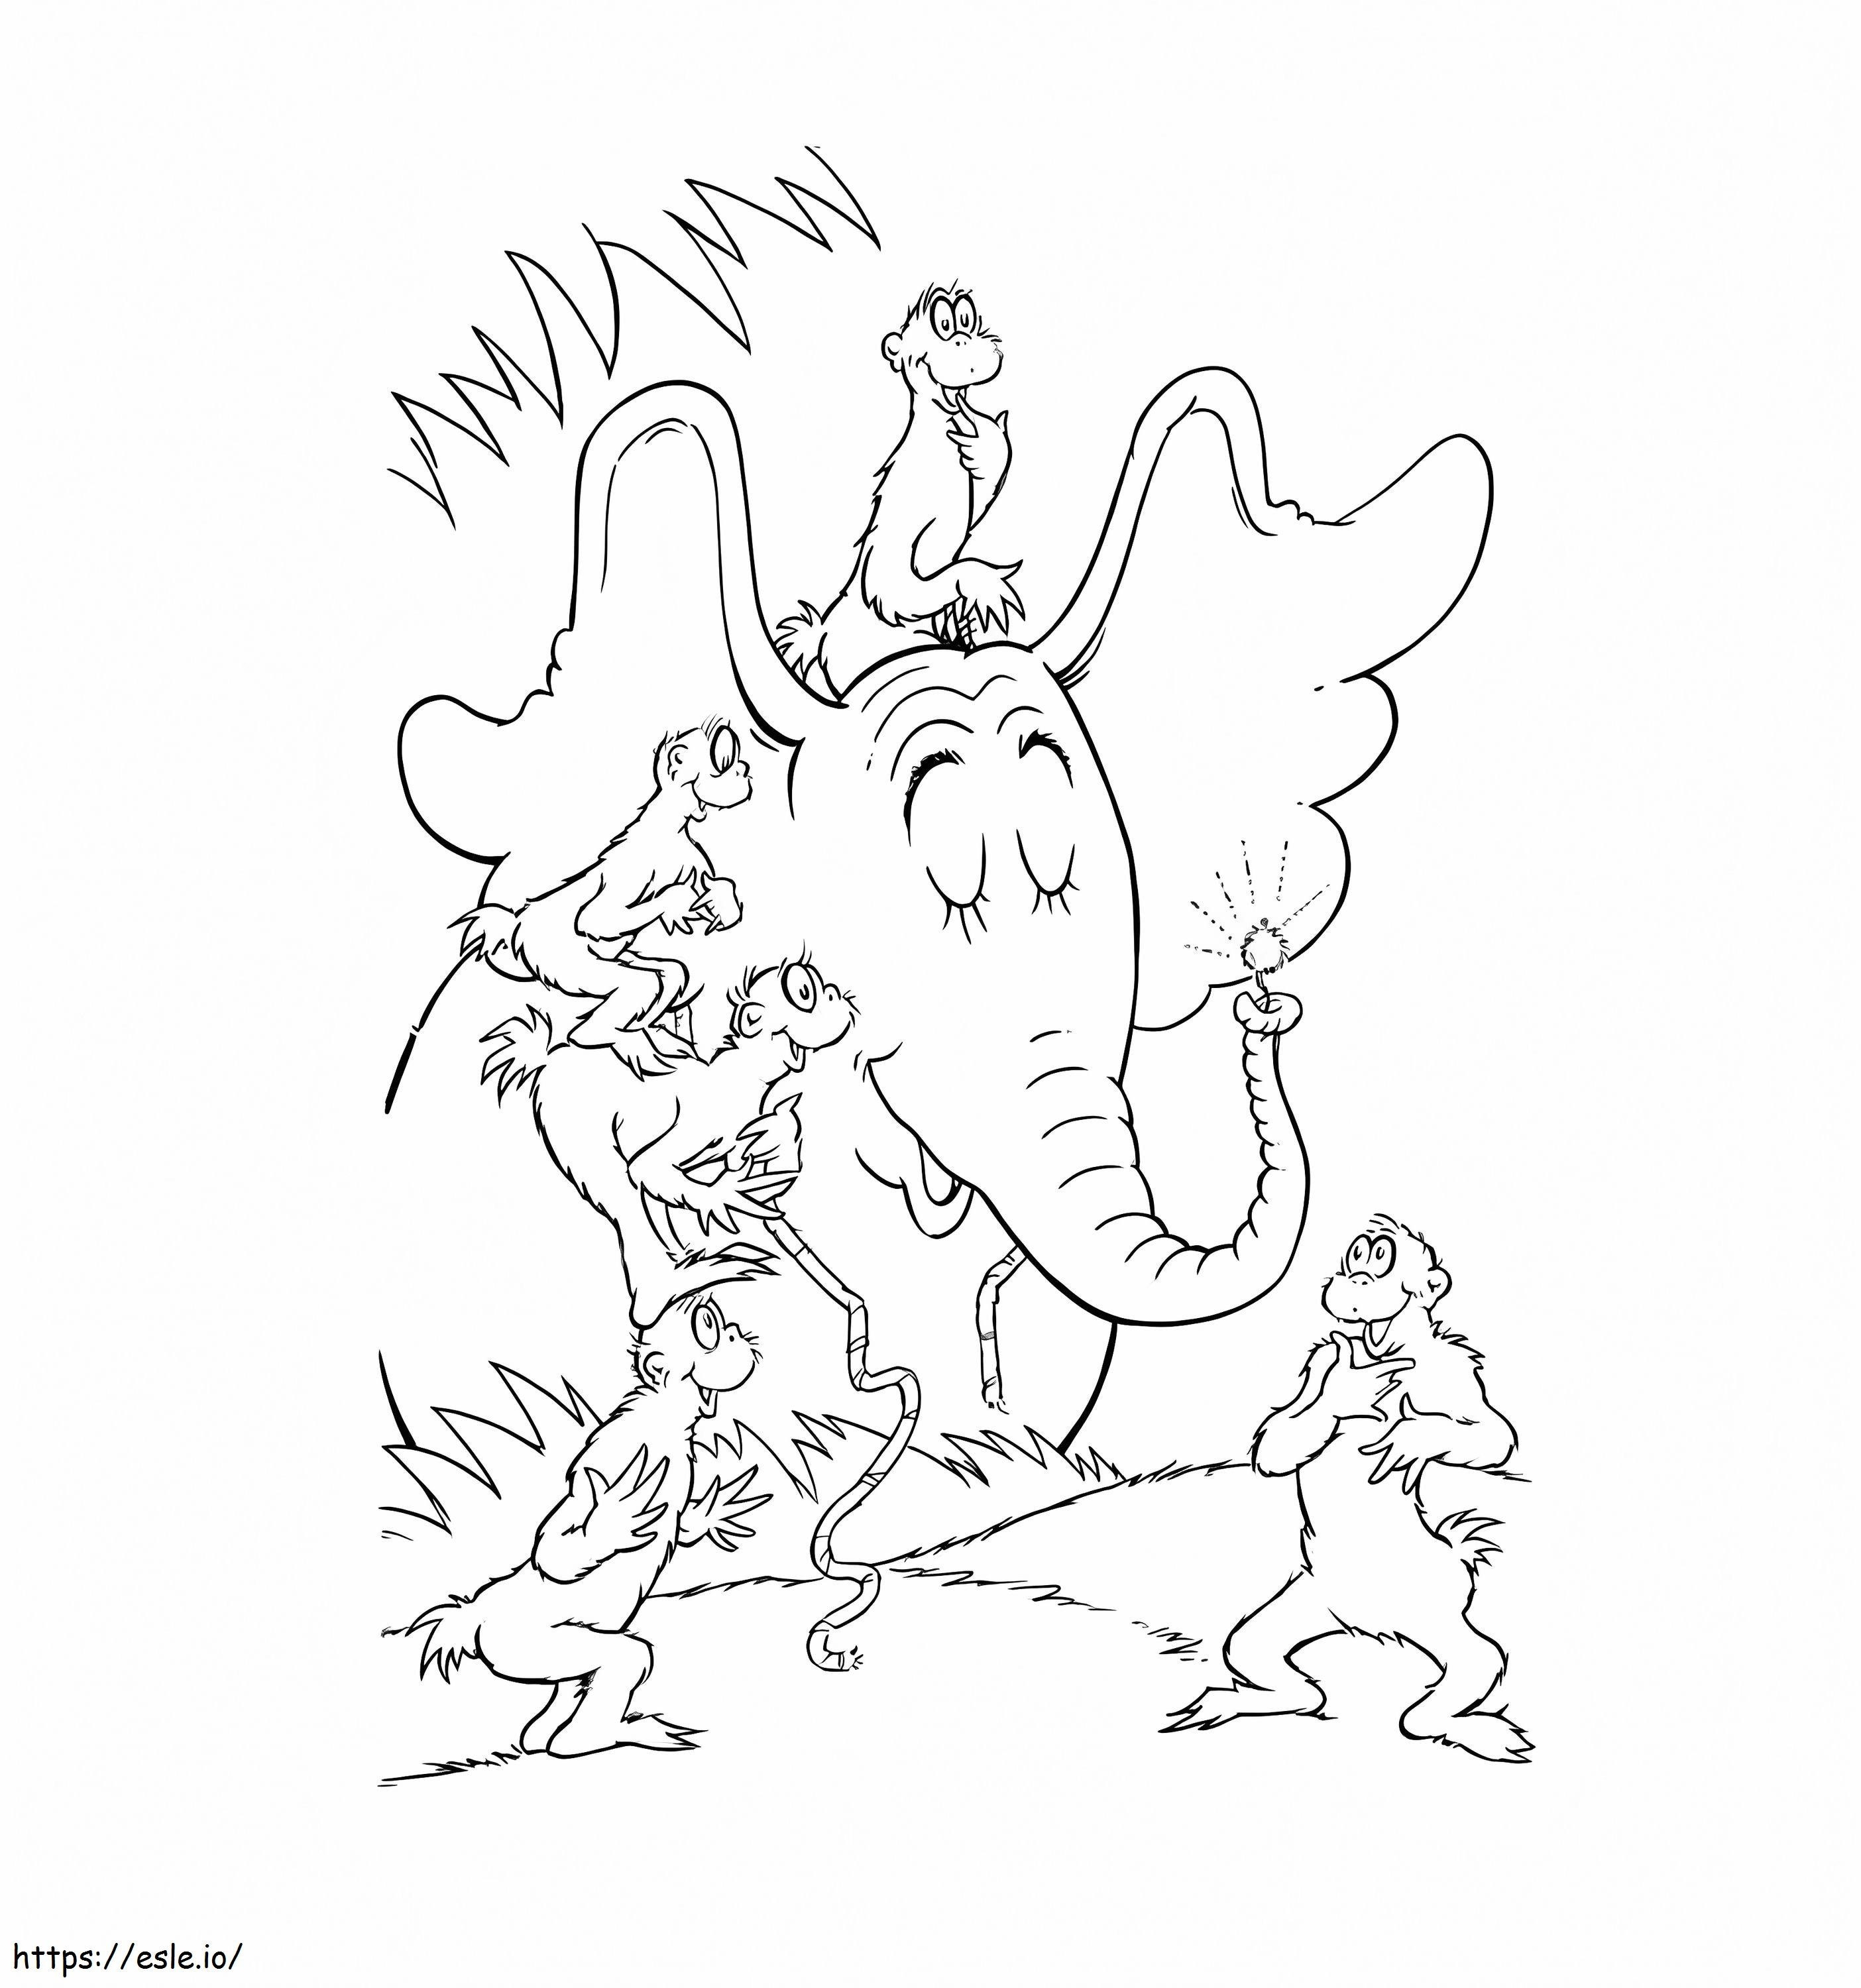 Horton And Friends coloring page